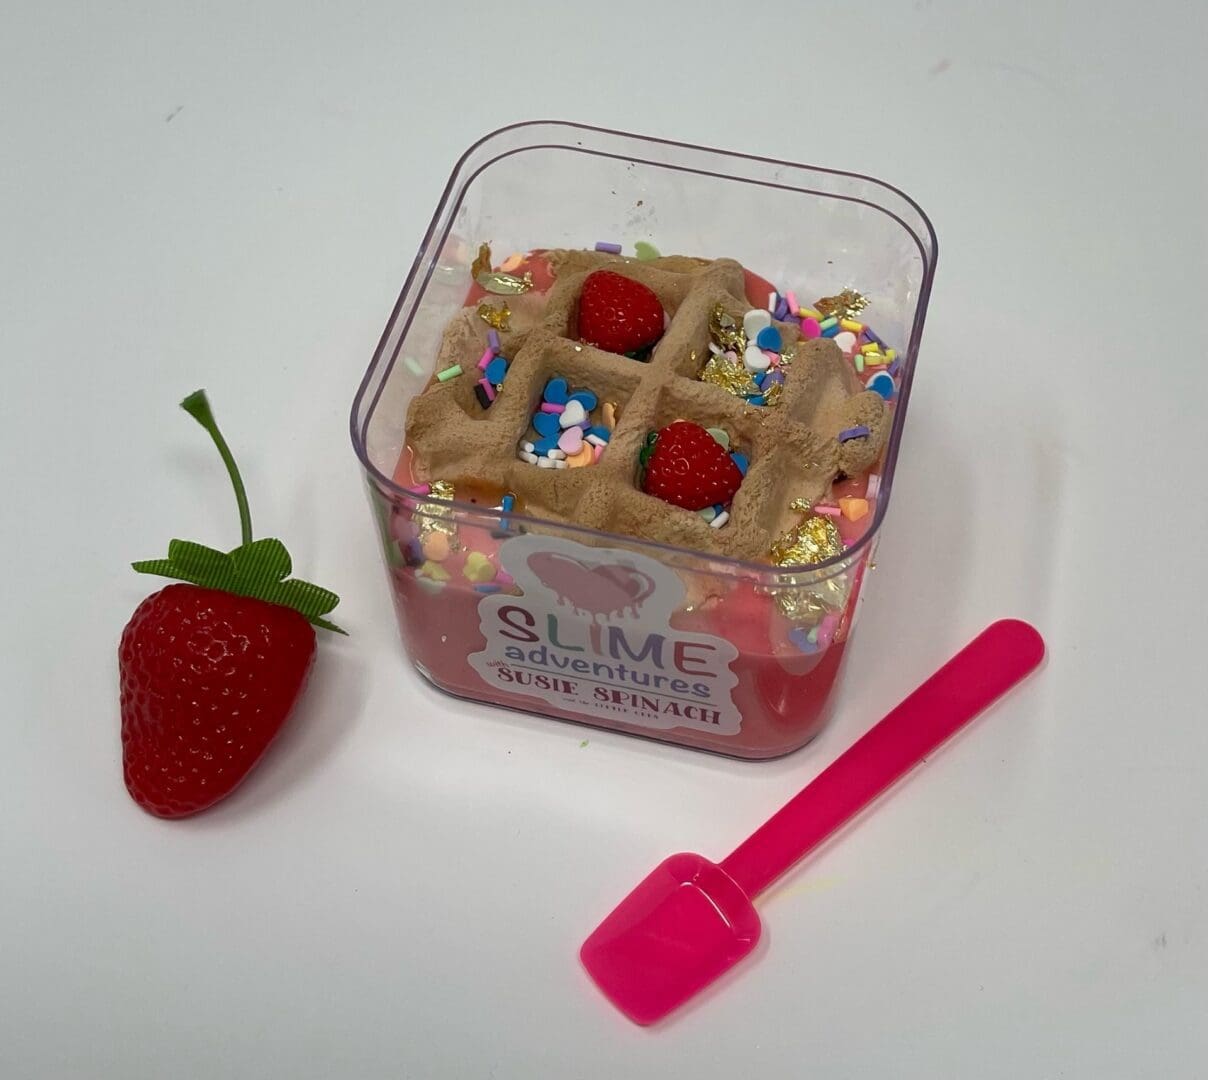 A strawberry and some other items are in a container.